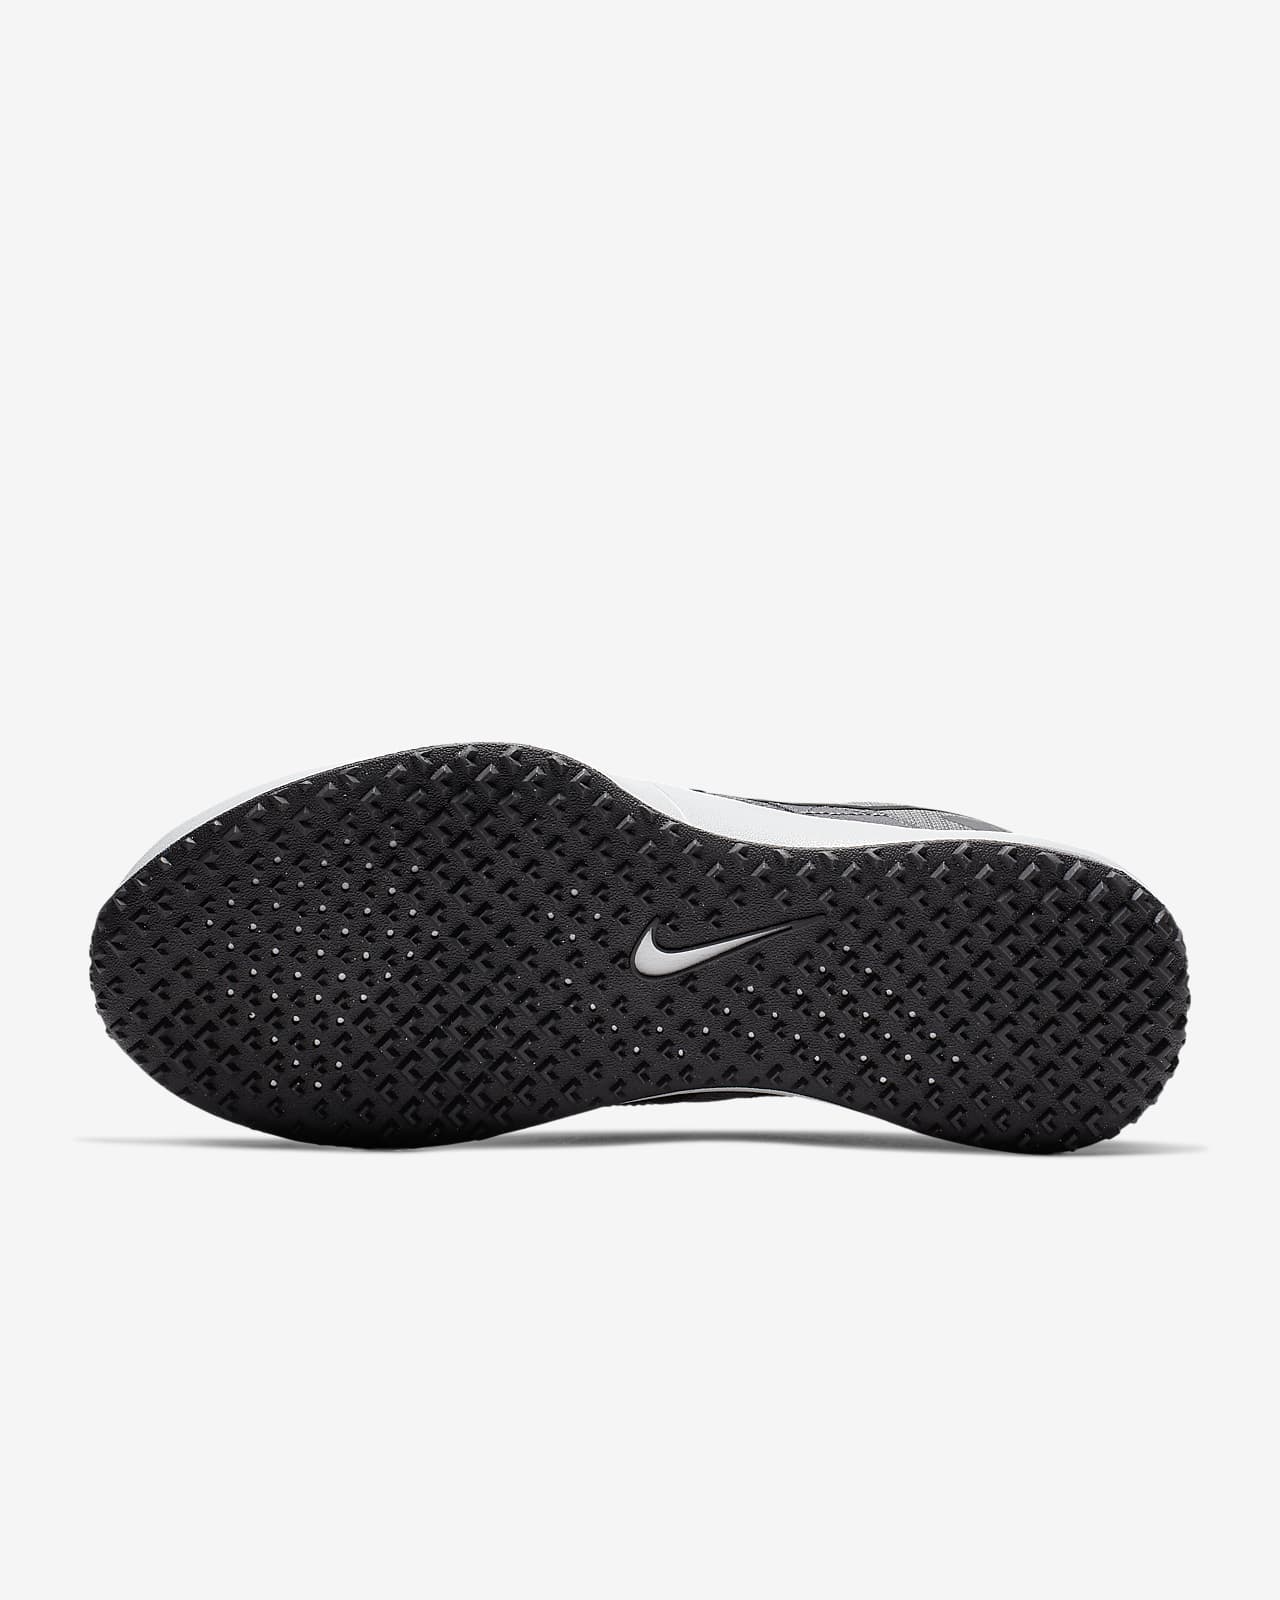 nike varsity compete tr 2 canada